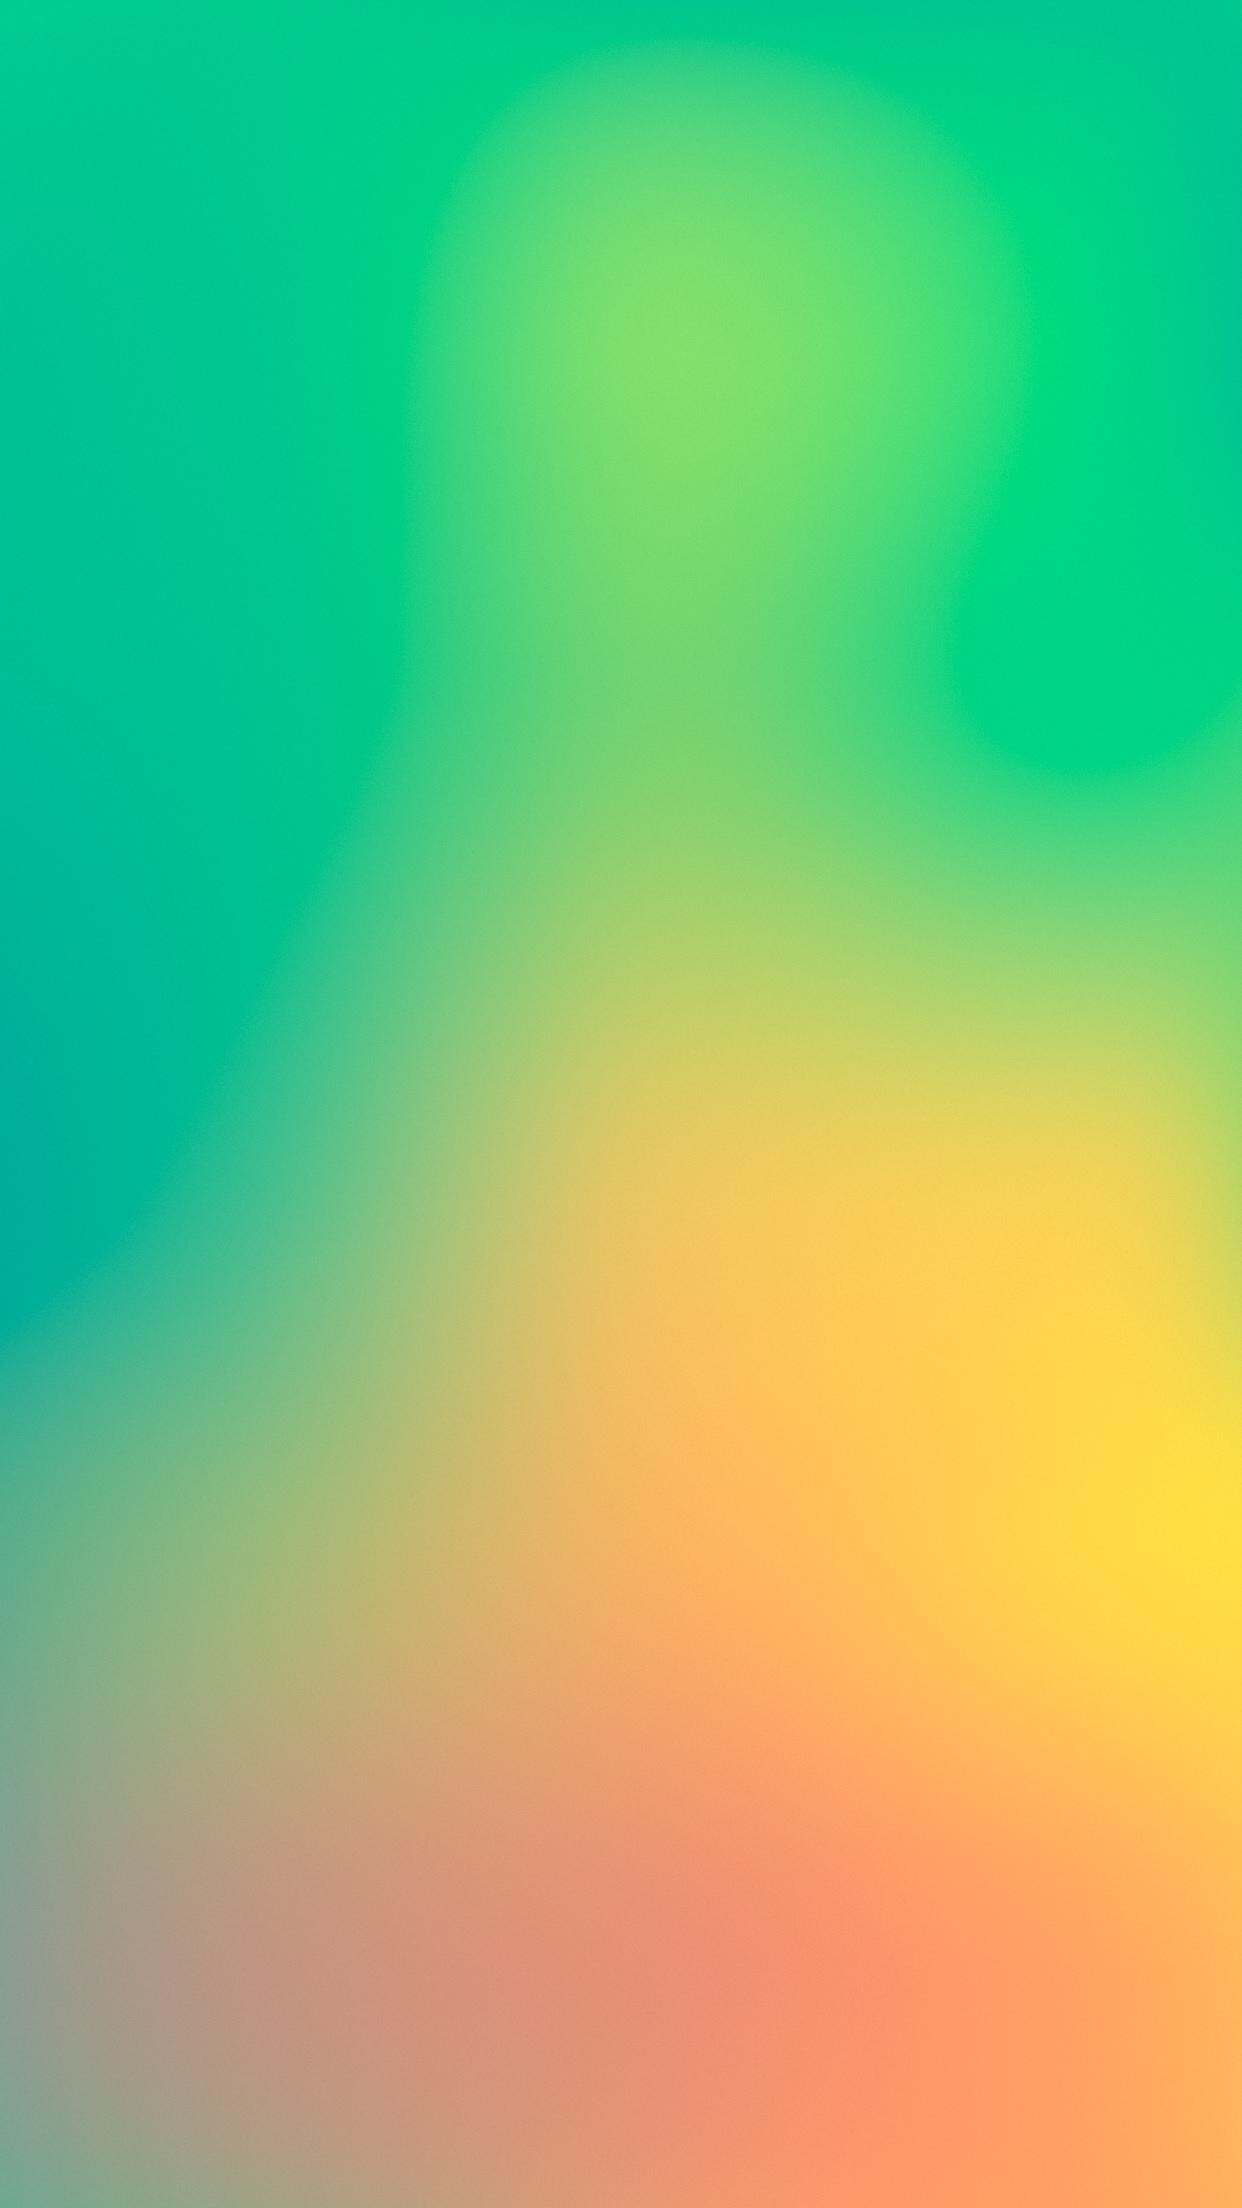 Blurred Colorful Vertical Portrait Display 1242x2208